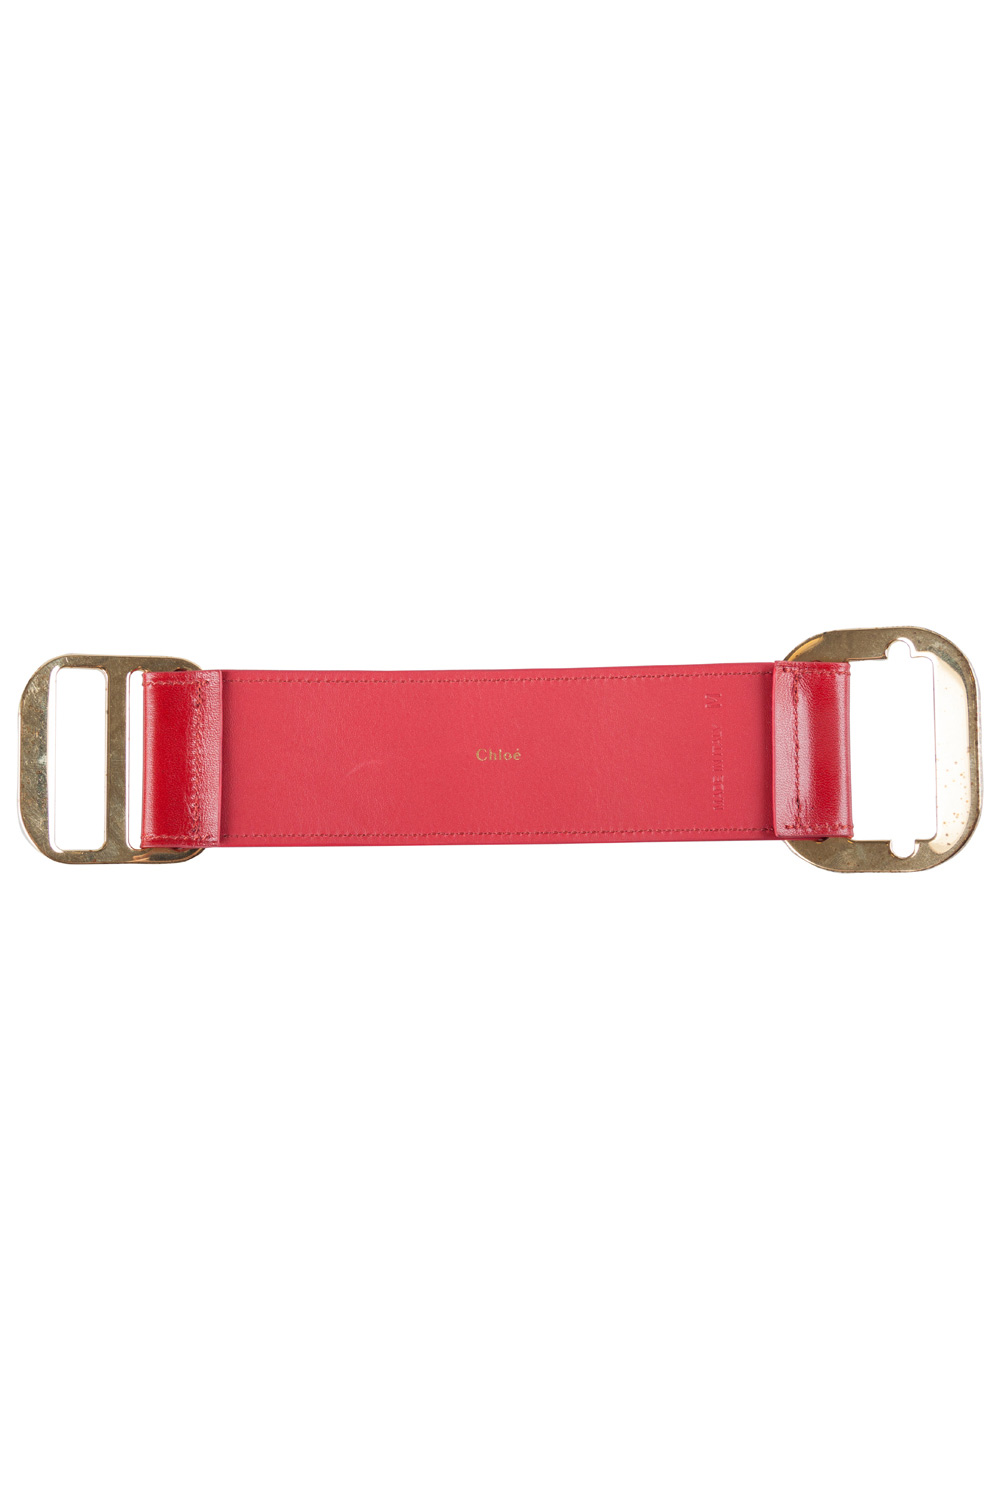 Chloe Red Leather Gold Tone Wide Bracelet